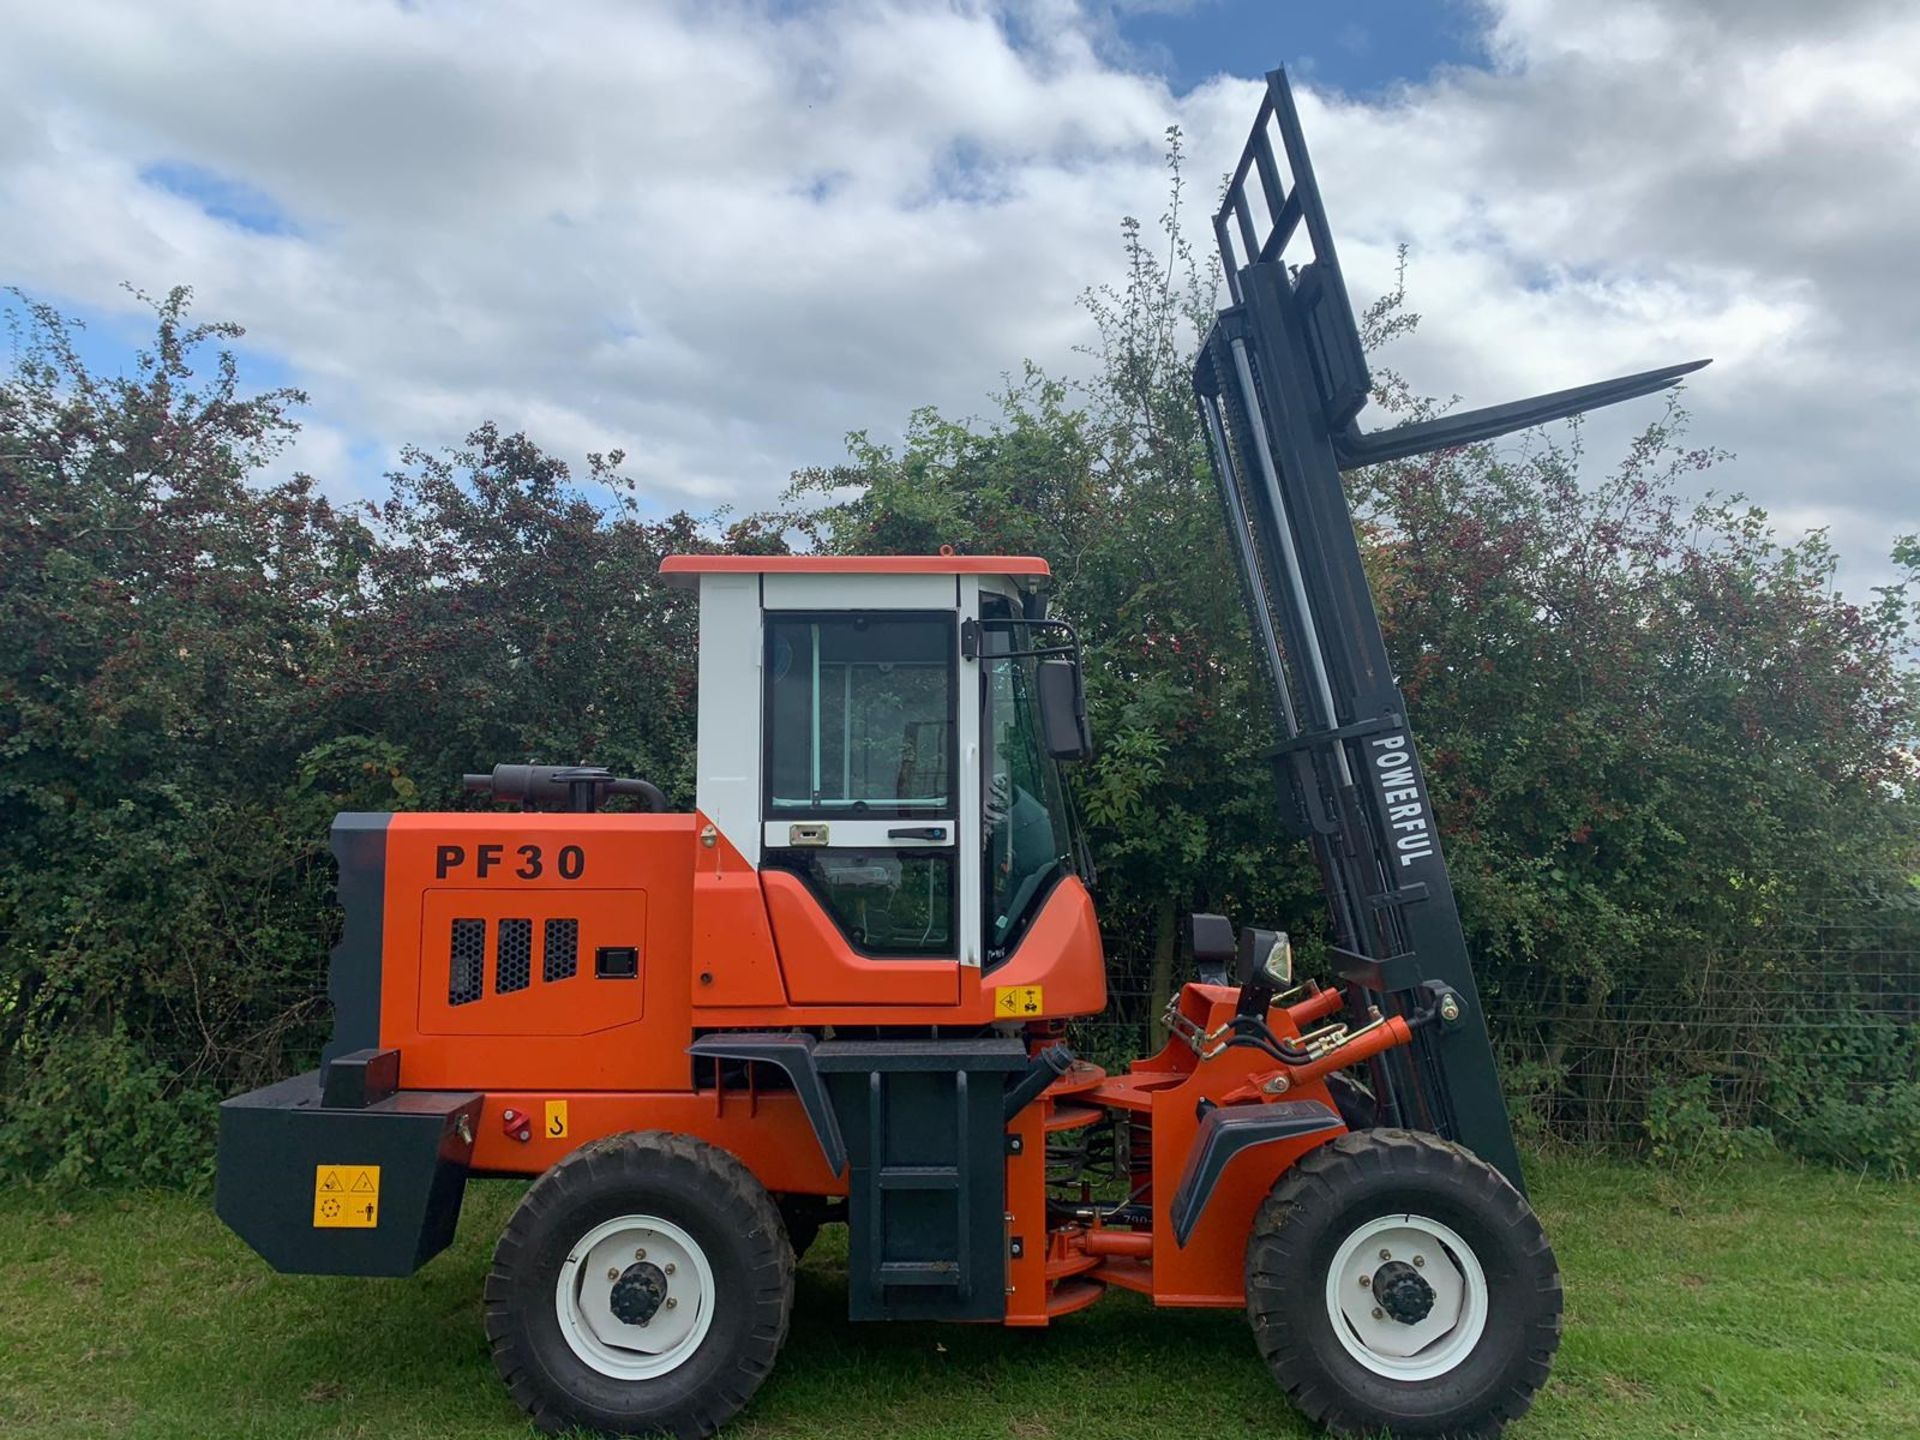 BRAND NEW 2019 POWERFUL PF30 4X4 ROUGH TERRAIN POWERFUL FORKLIFT C/W 2 STAGE MAST *PLUS VAT* - Image 4 of 12